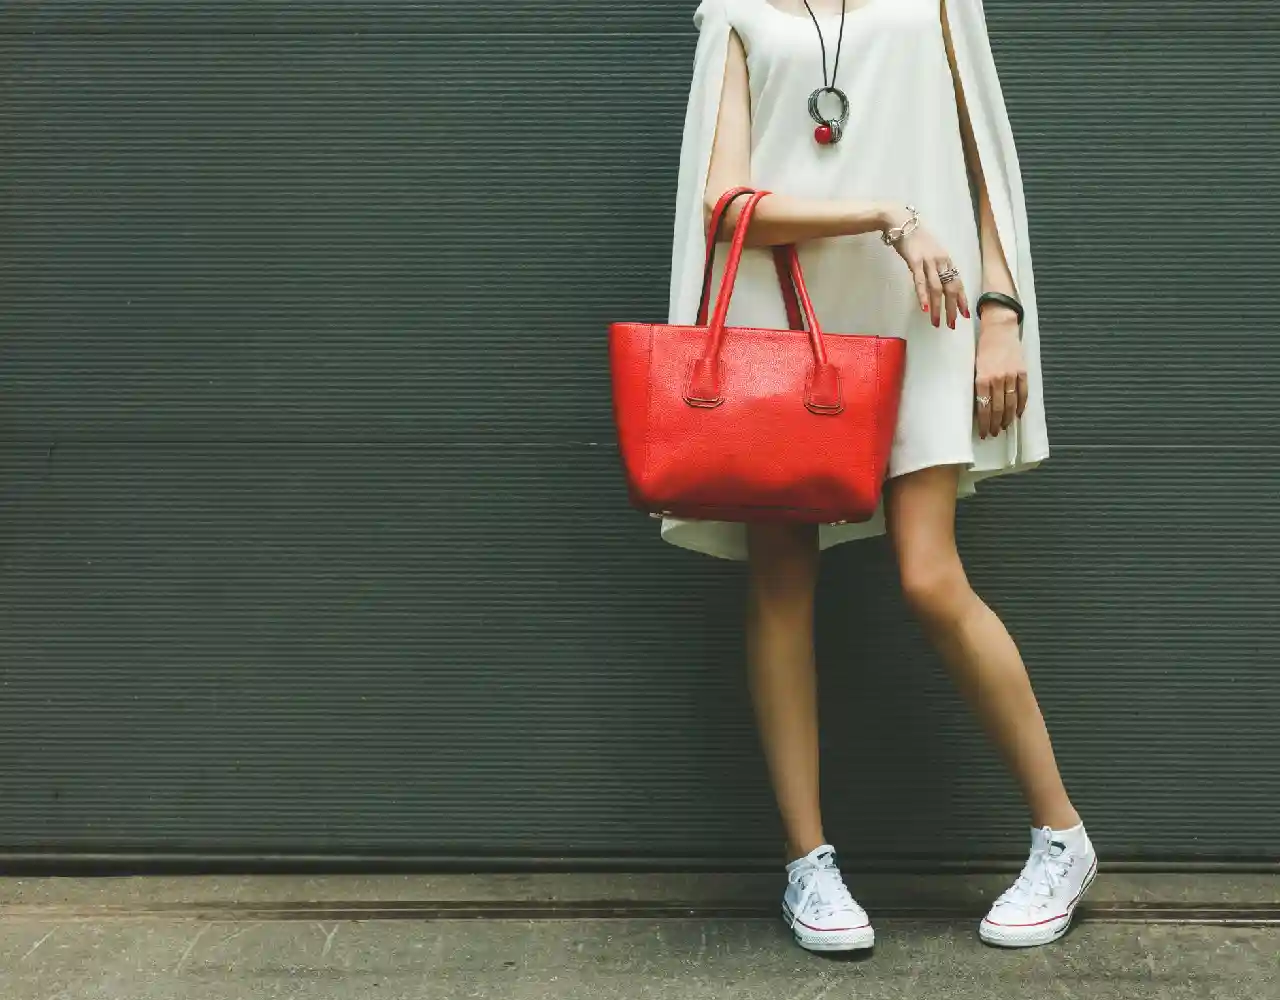 Top Designer Bags Every Fashionista Should Own